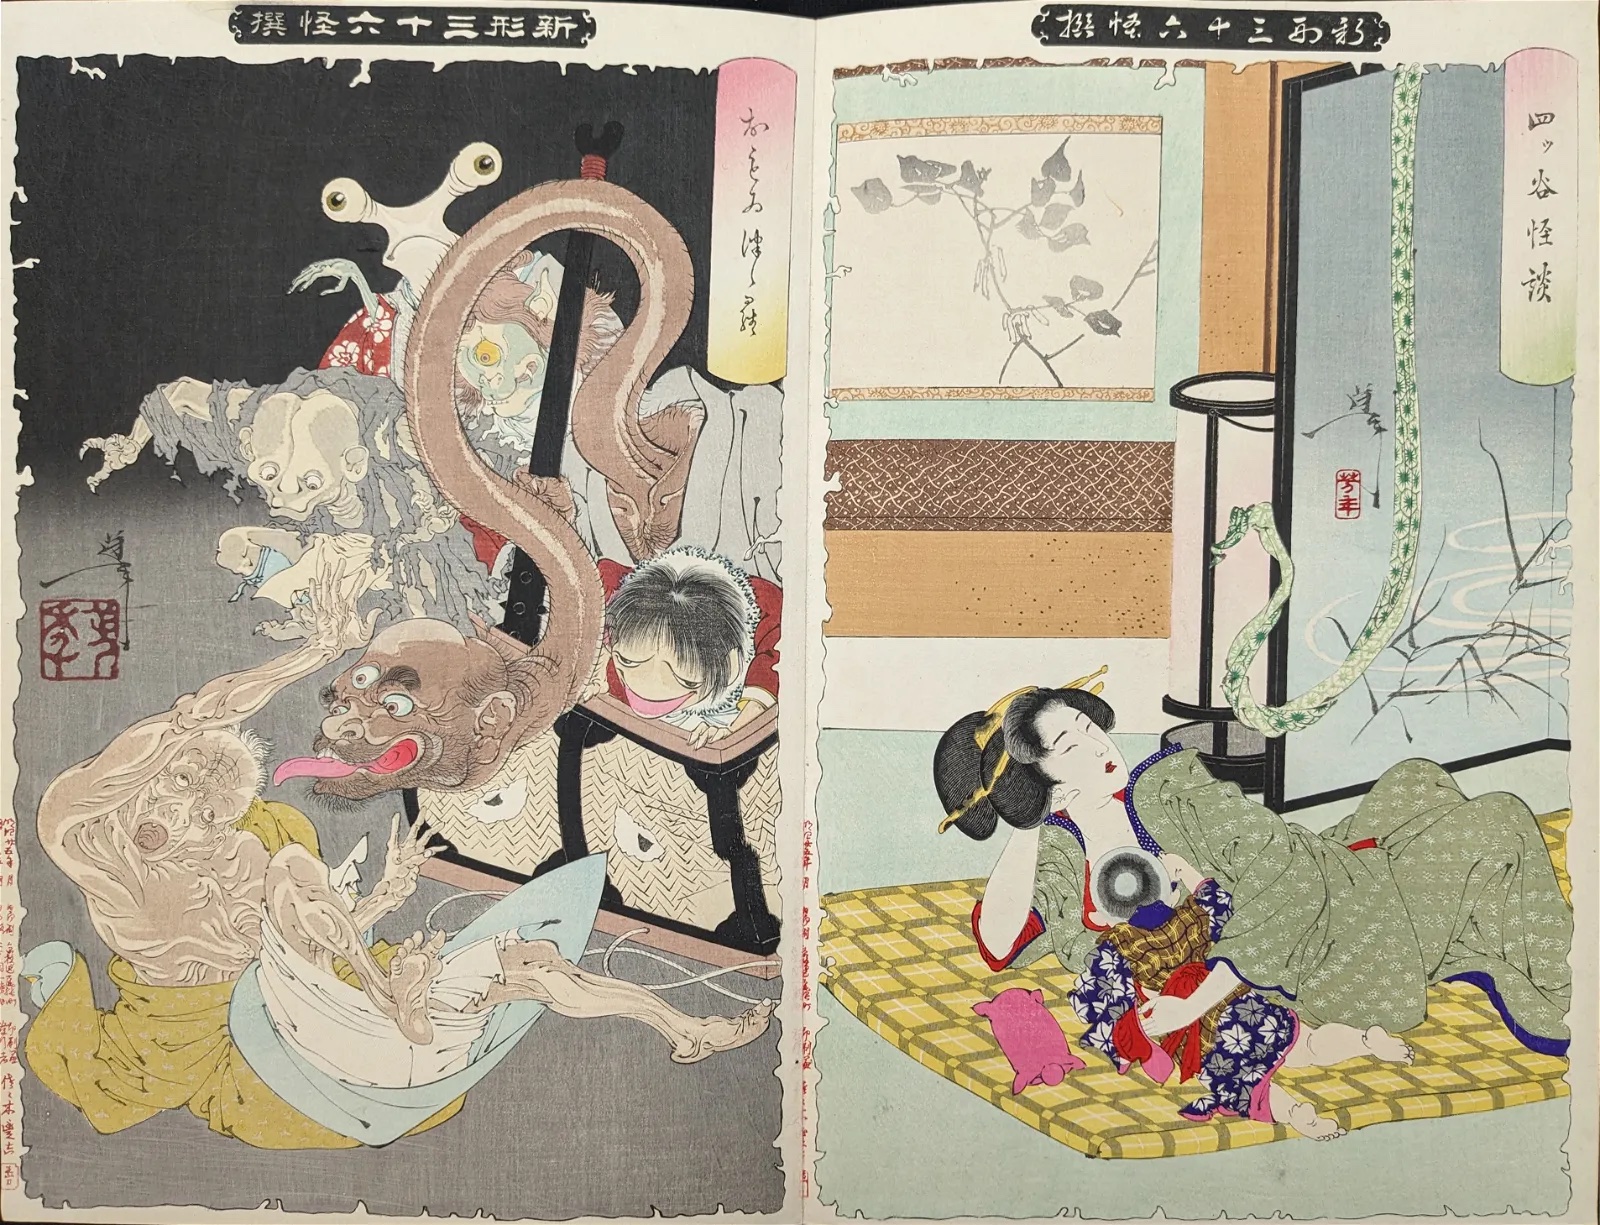 Complete album of 'Thirty-Six New Forms of Ghosts' by Tsukioka Yoshitoshi, estimated at $5,000-$7,000 at Tremont Auctions.